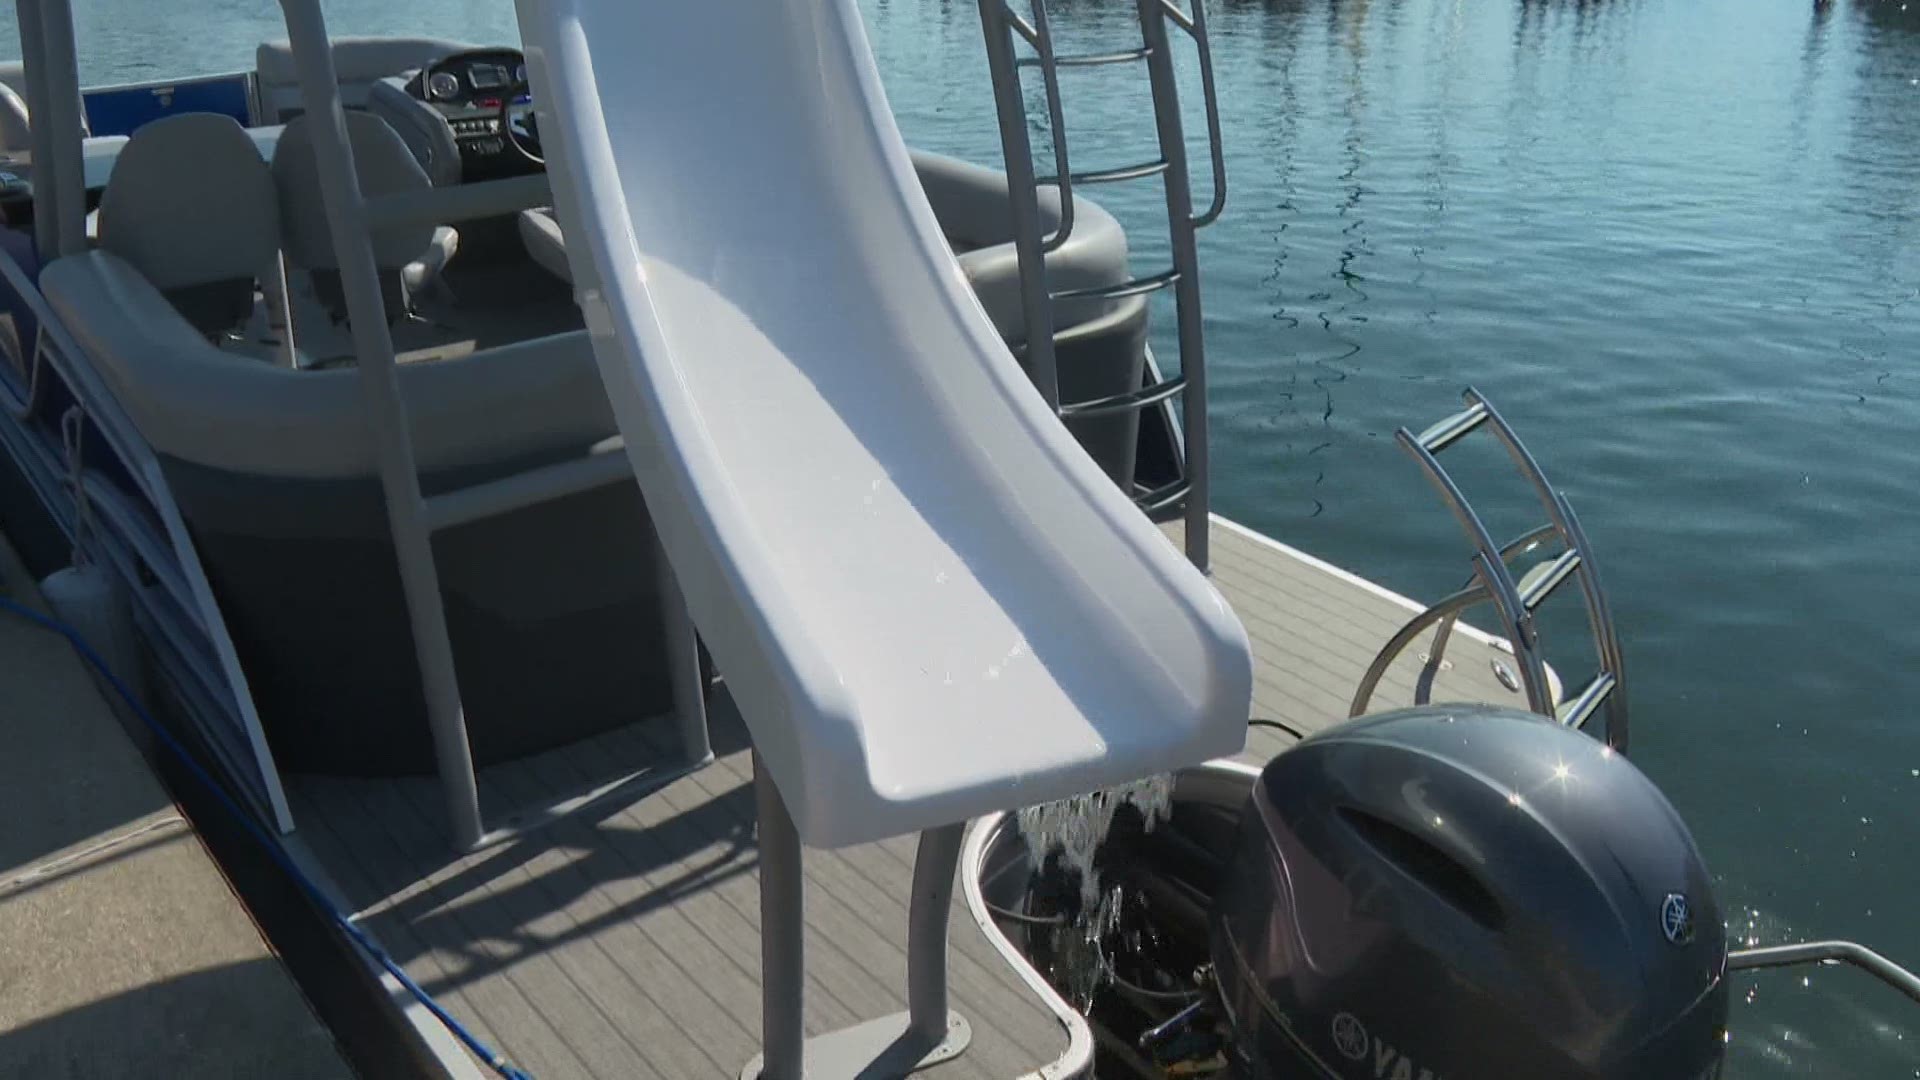 The state of Michigan is in the top three for boat registrations in the country.